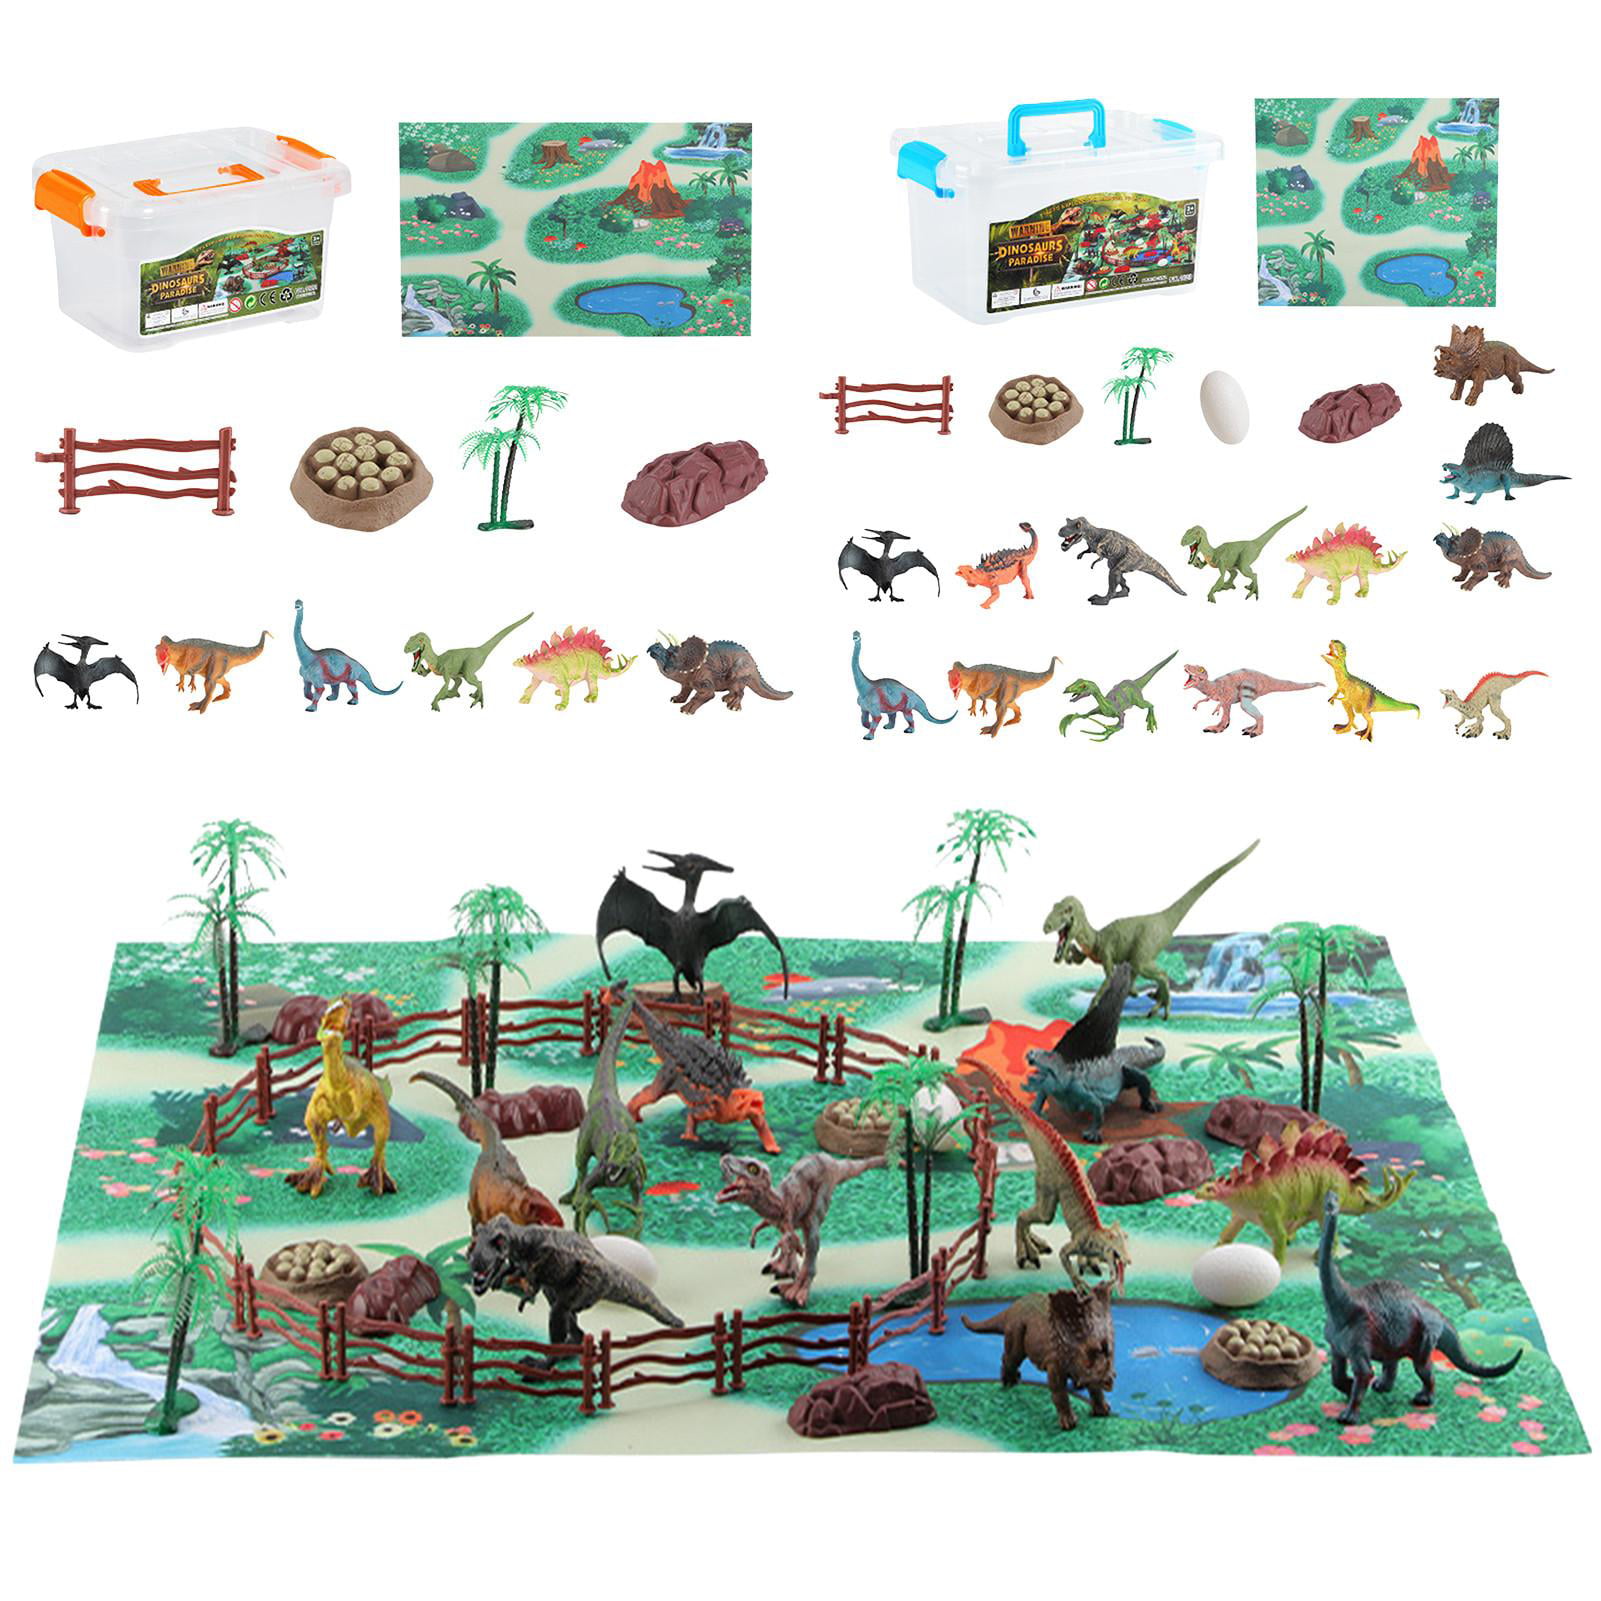 Sanlebi Dinosaur Toys Realistic Figures Playset With Activity Play Mat And Stro 